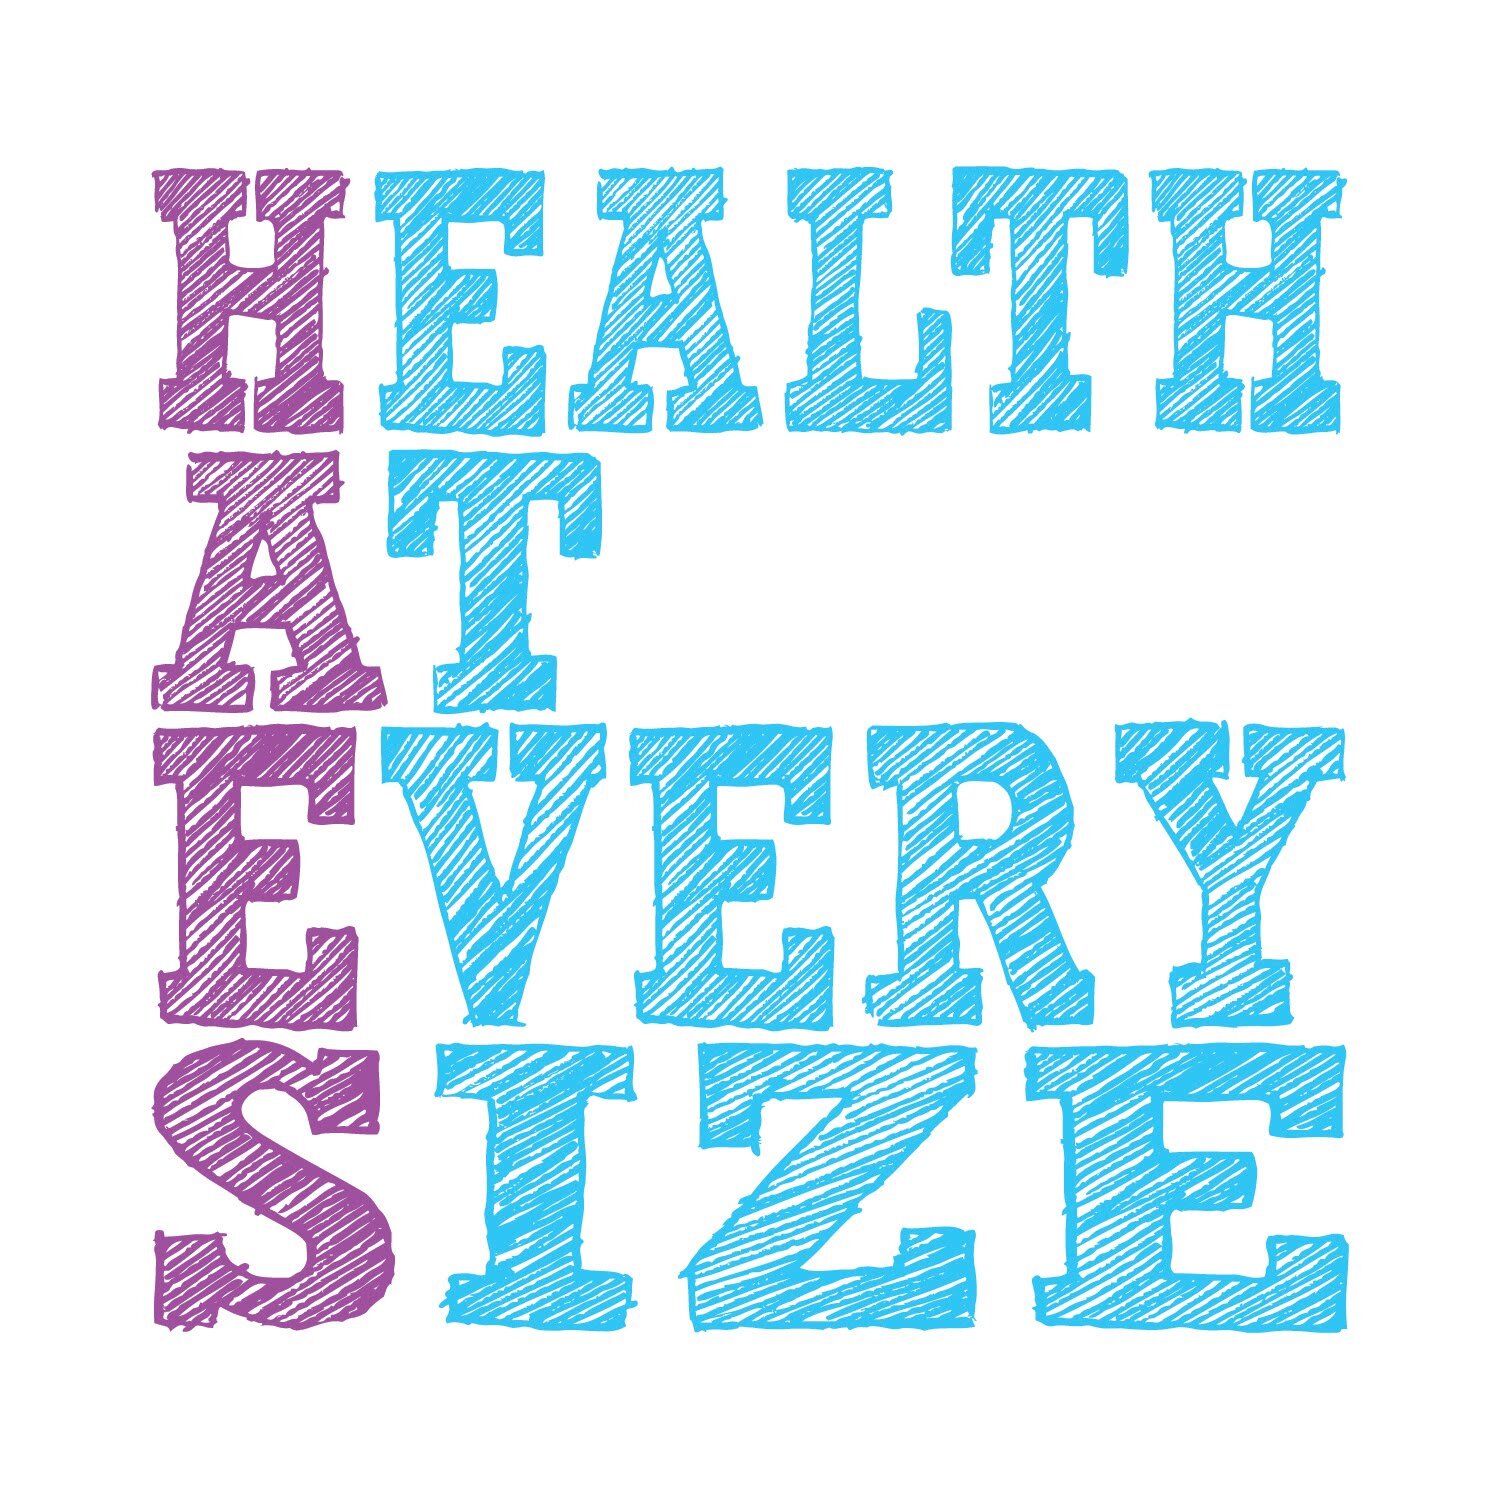 Heath at every size is a lifestyle philosophy that focuses on intuitive eating and pleasurable physical activity rather than dieting and weight loss.